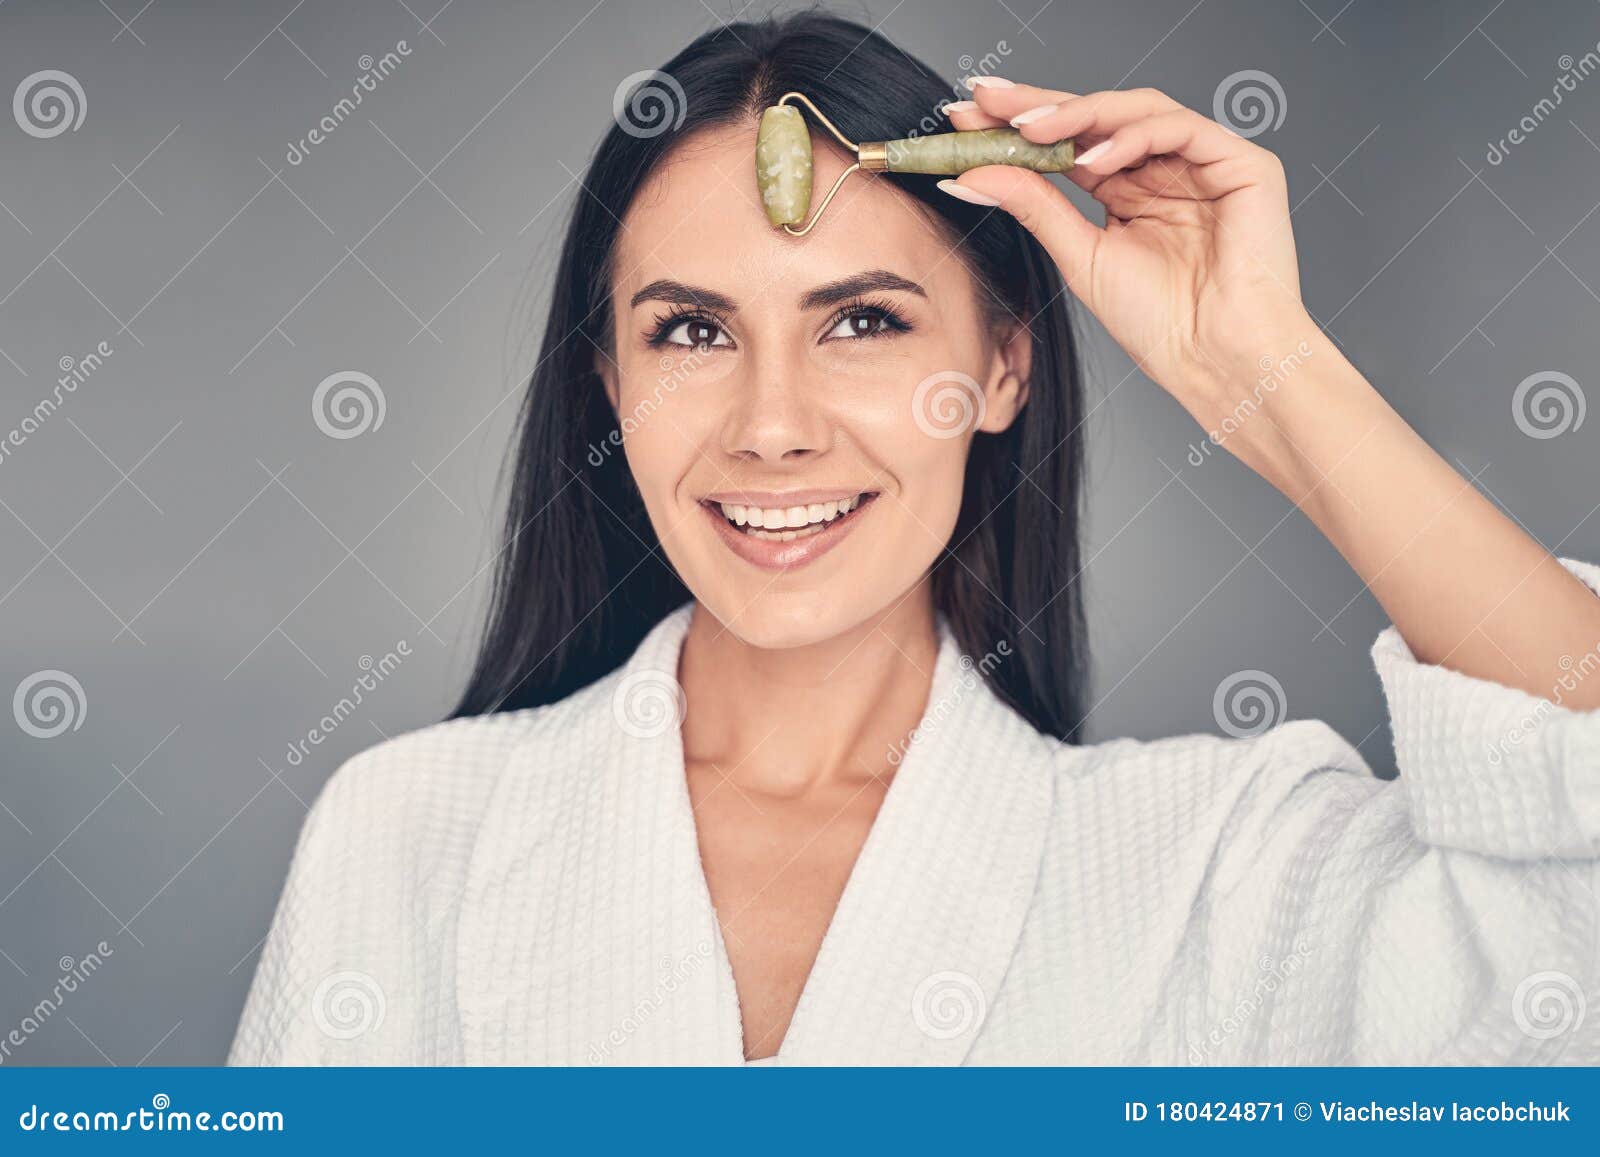 Smiling Pleasant Girl Doing A Facial Massage Stock Image Image Of